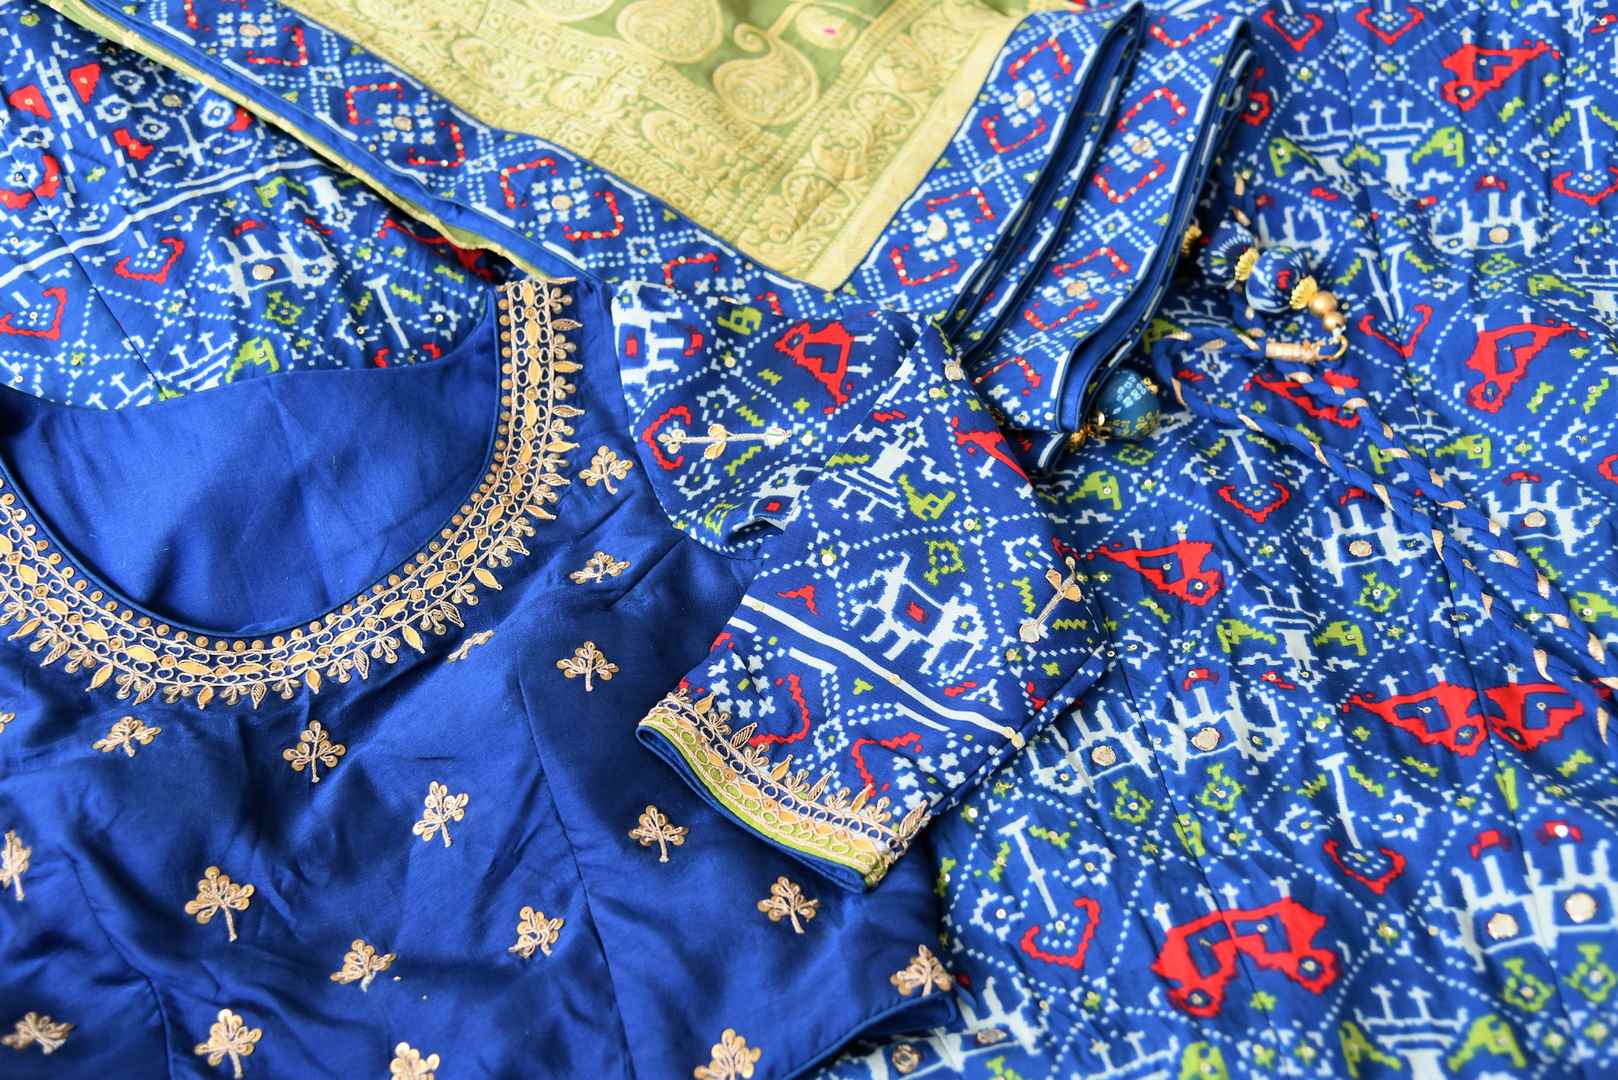 Buy dark blue patola print gota work silk lehenga online in USA with green dupatta. Be the talk of weddings and special occasions with a splendid collection of Indian designer lehengas from Pure Elegance Indian clothing store in USA. We have a spectacular range of bridal lehengas for Indian brides in USA. -details